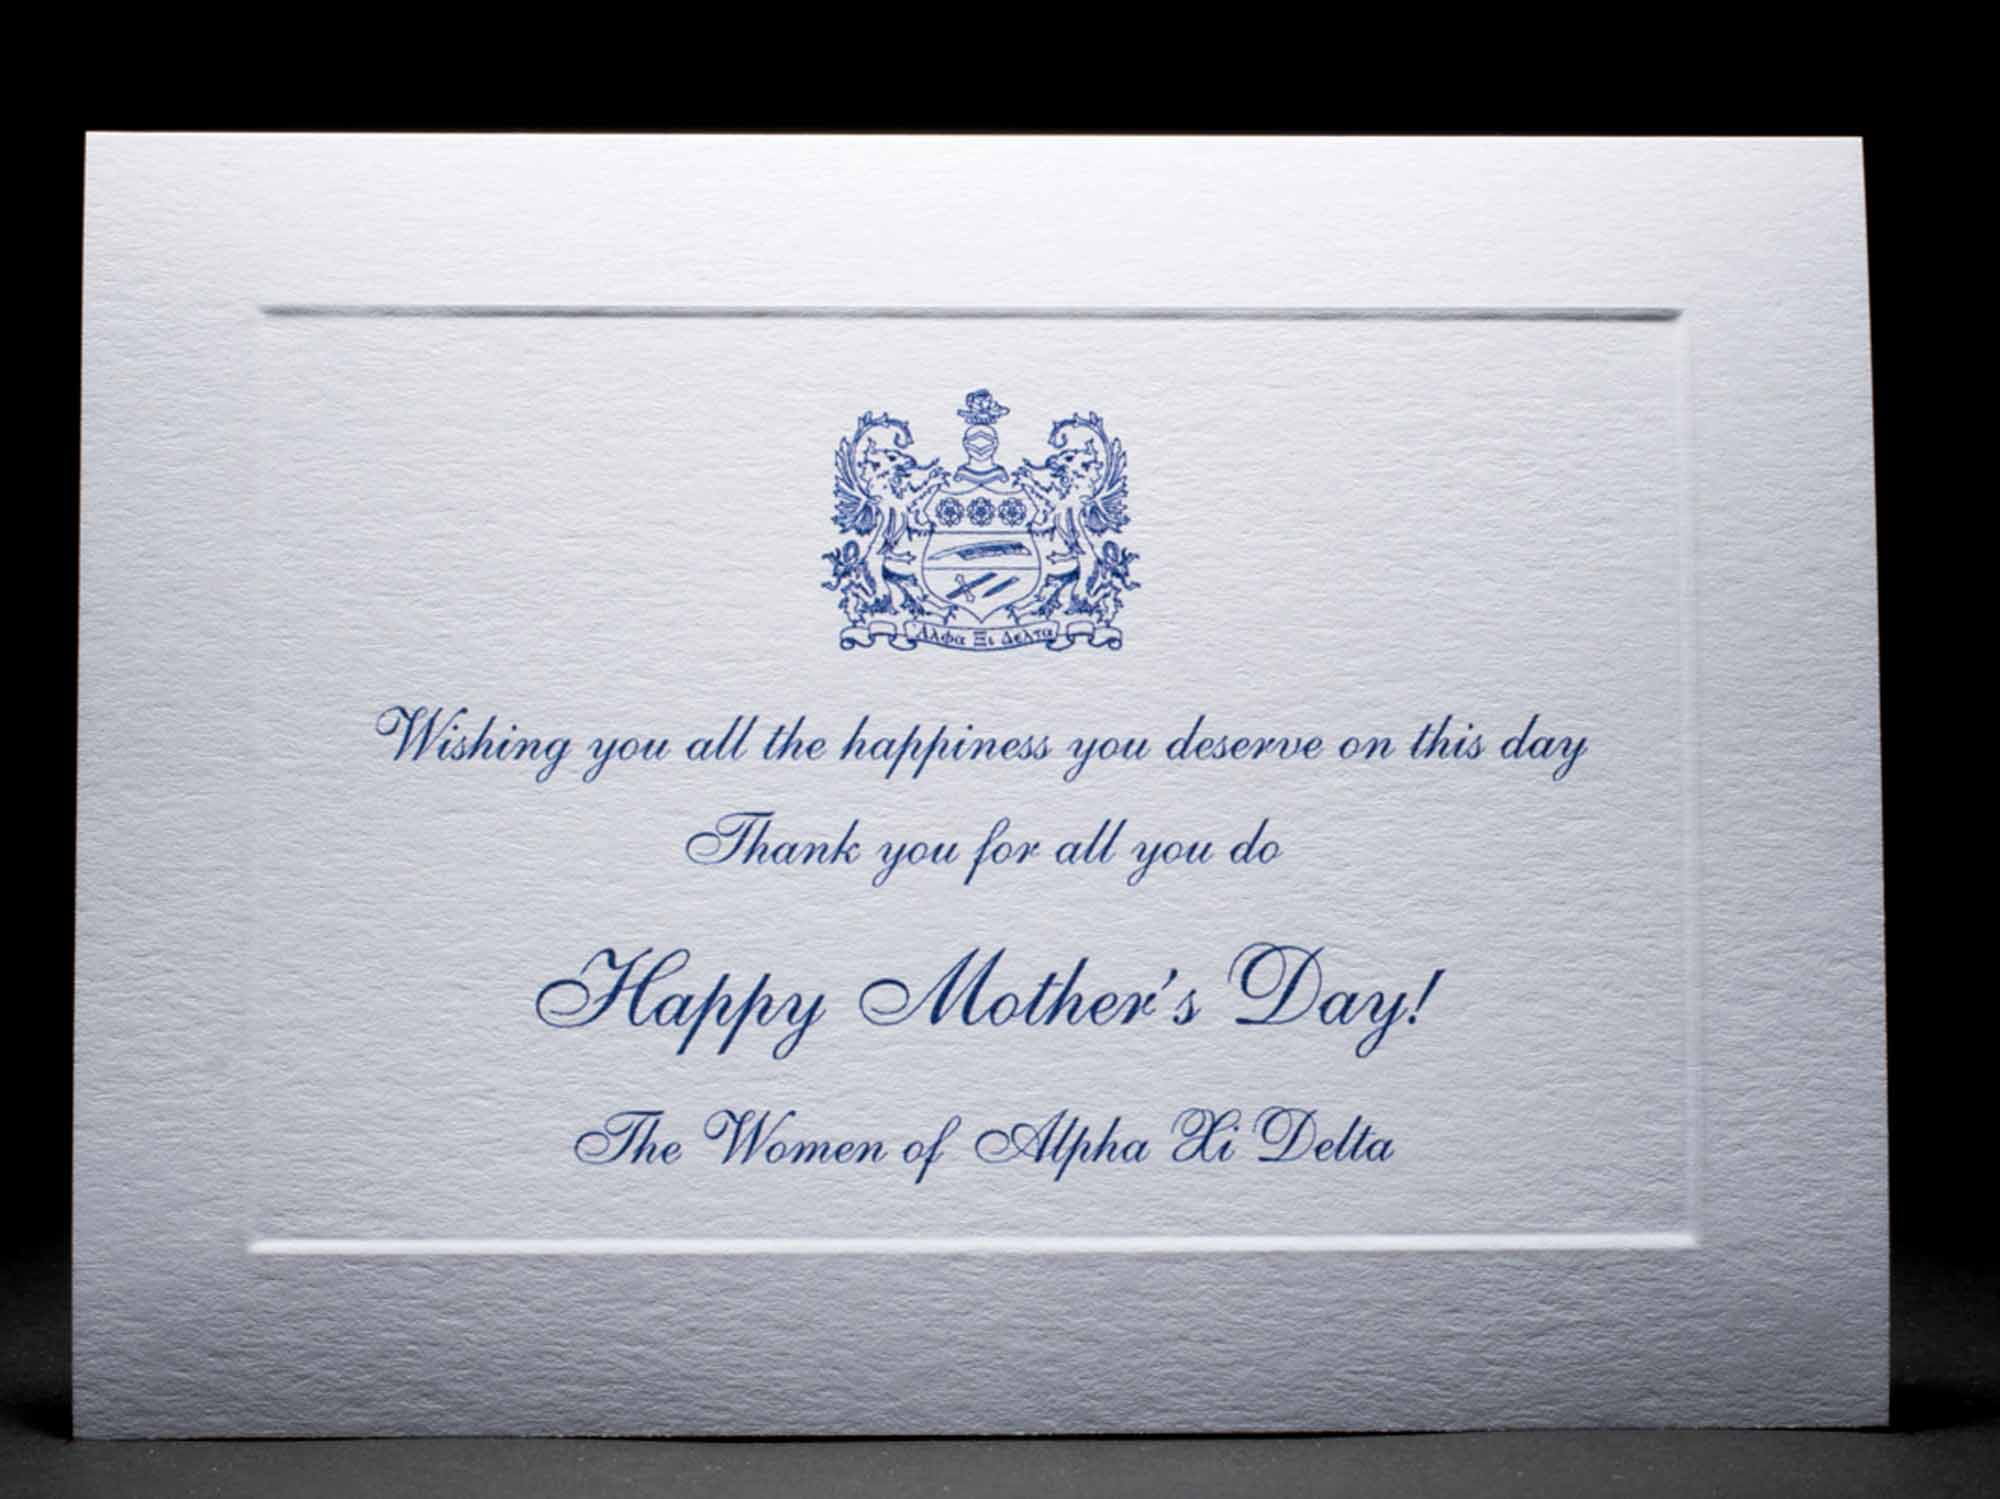 Mother's Day Cards Alpha Xi Delta